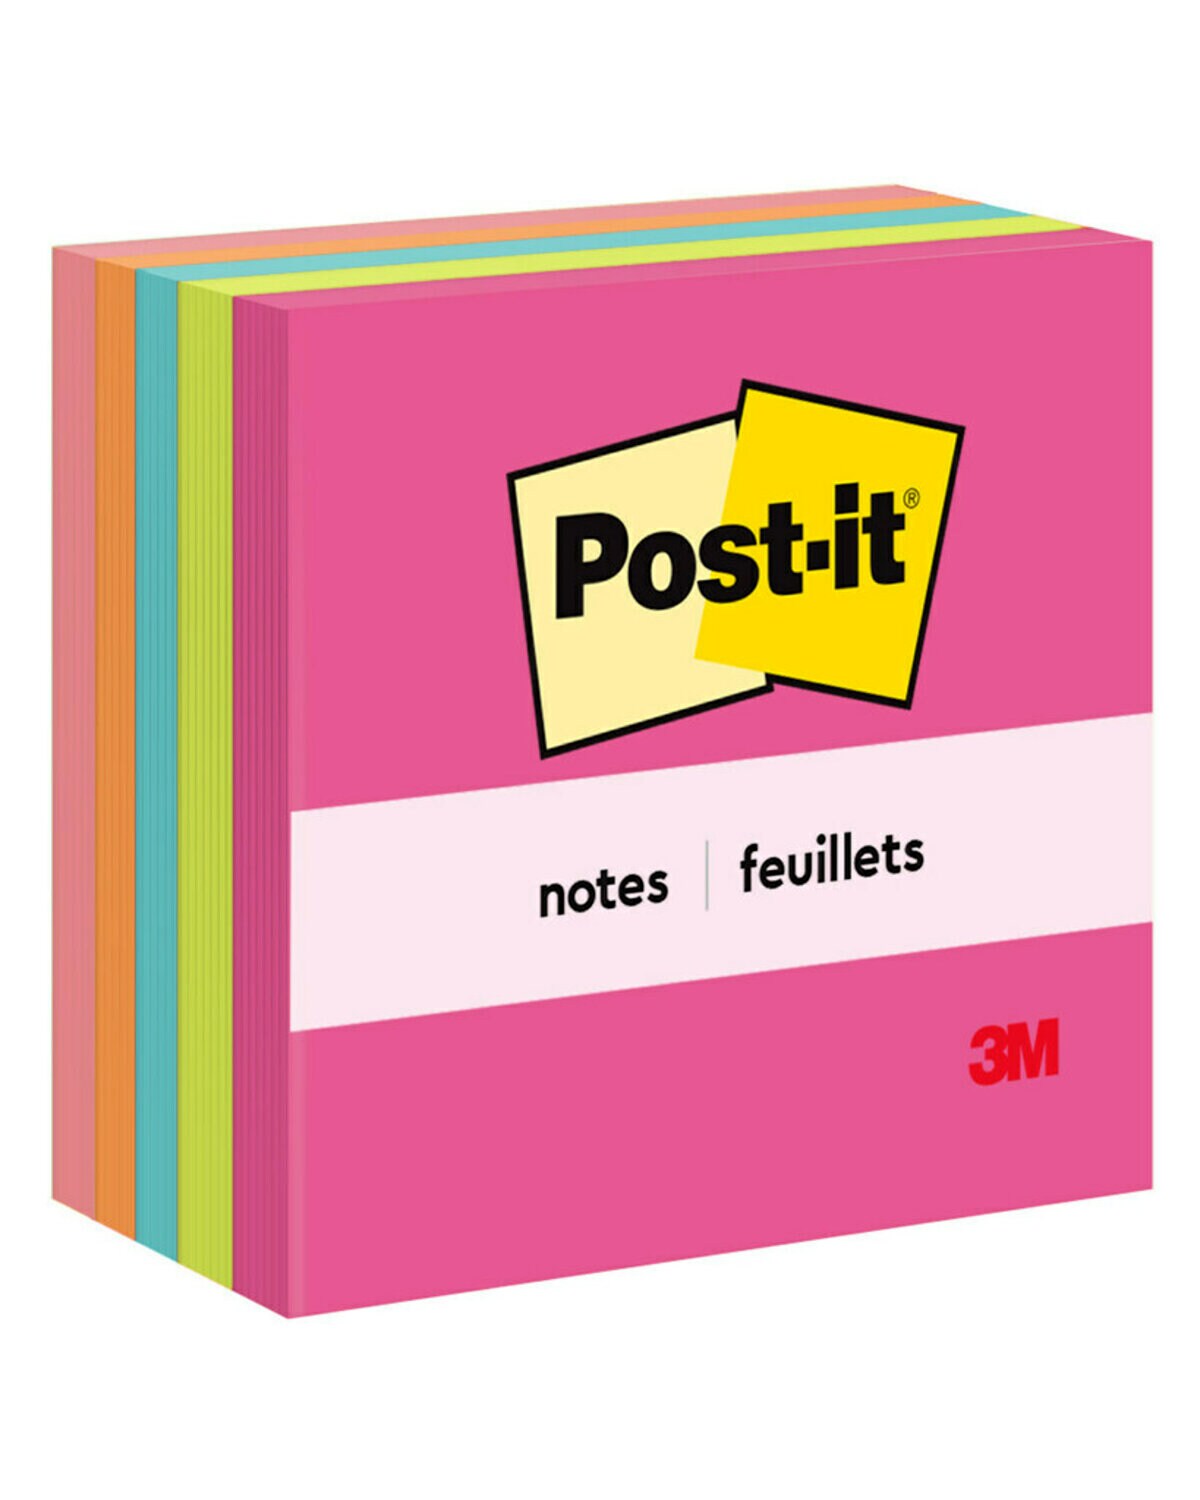 7100048125 - Post-it Notes 654-5PK, 3 in x 3 in (76 mm x 76 mm), Poptimistic Collection